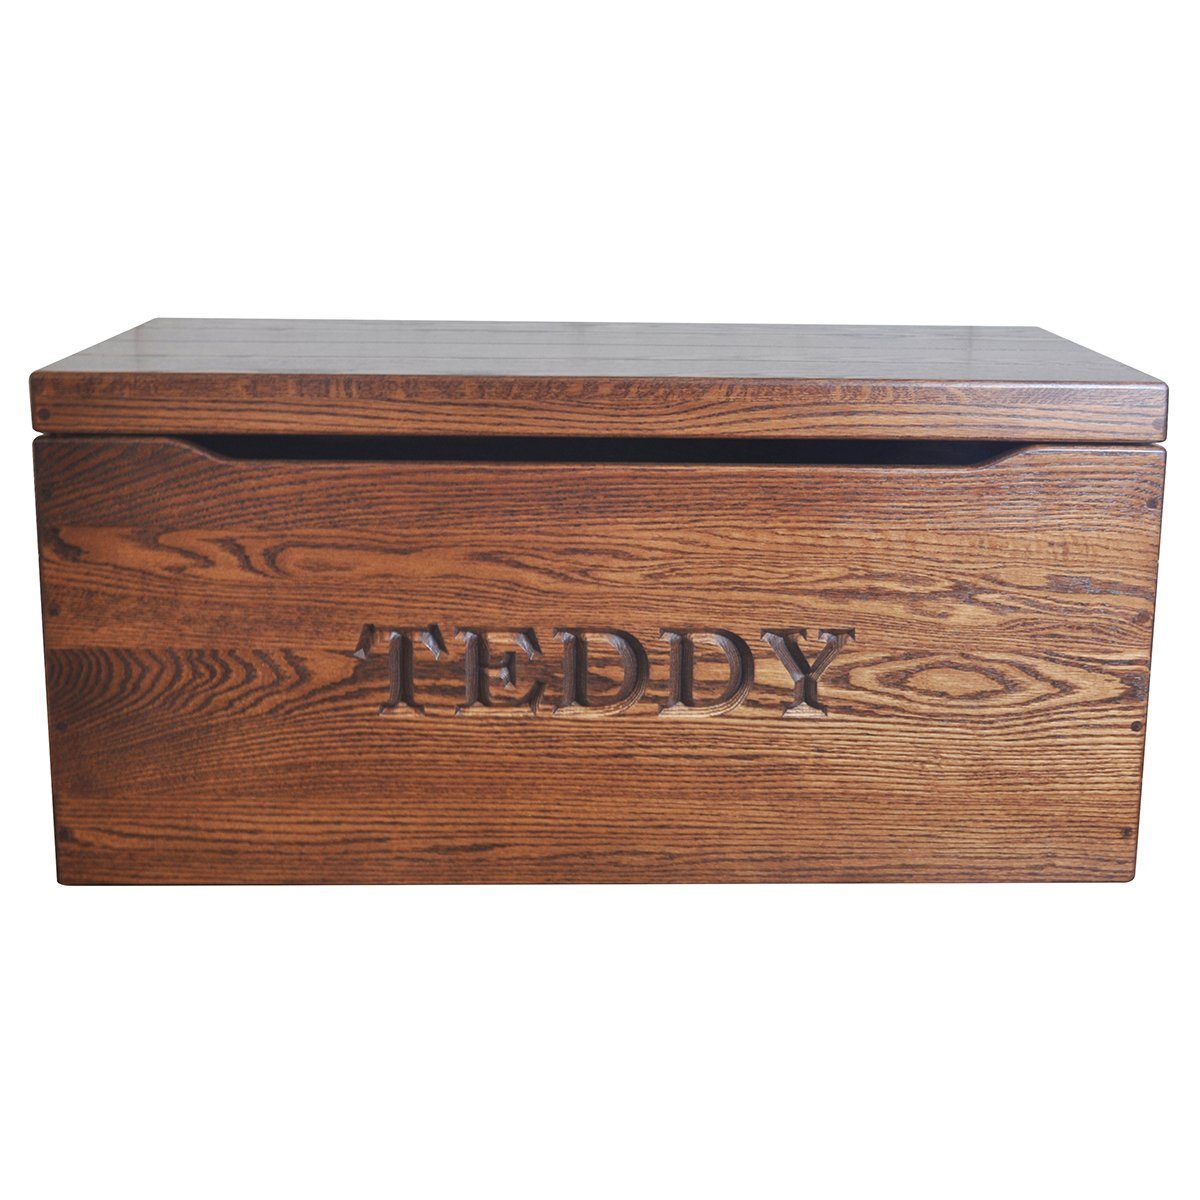 Example of Engraved Wooden Toy Chest